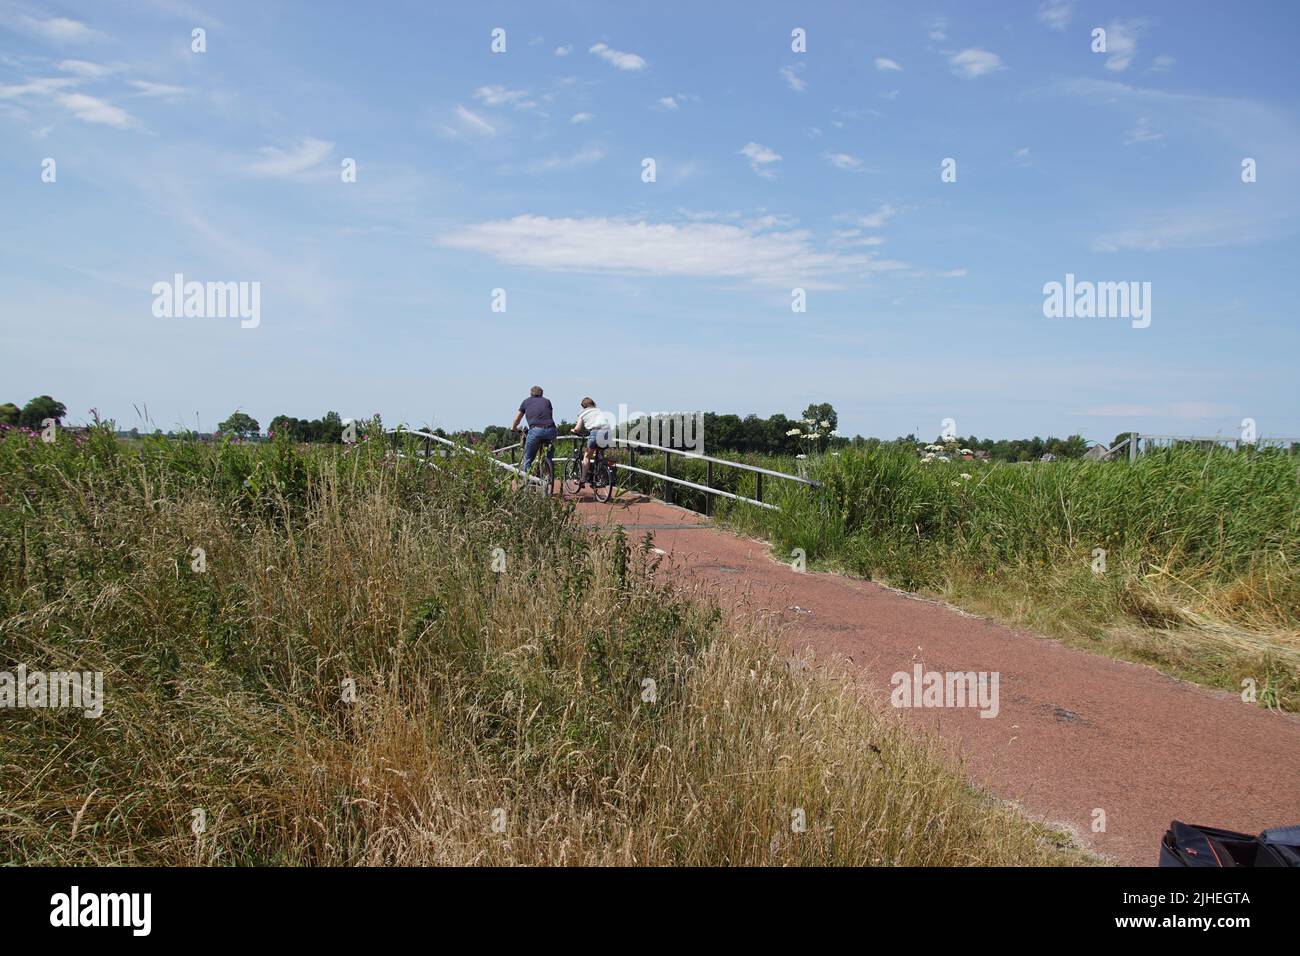 Pasturelandscape in North Holland. Bike path through the meadows with cyclists on a bridge over a canal to the village of Bergen. Summer, Netherlands, Stock Photo